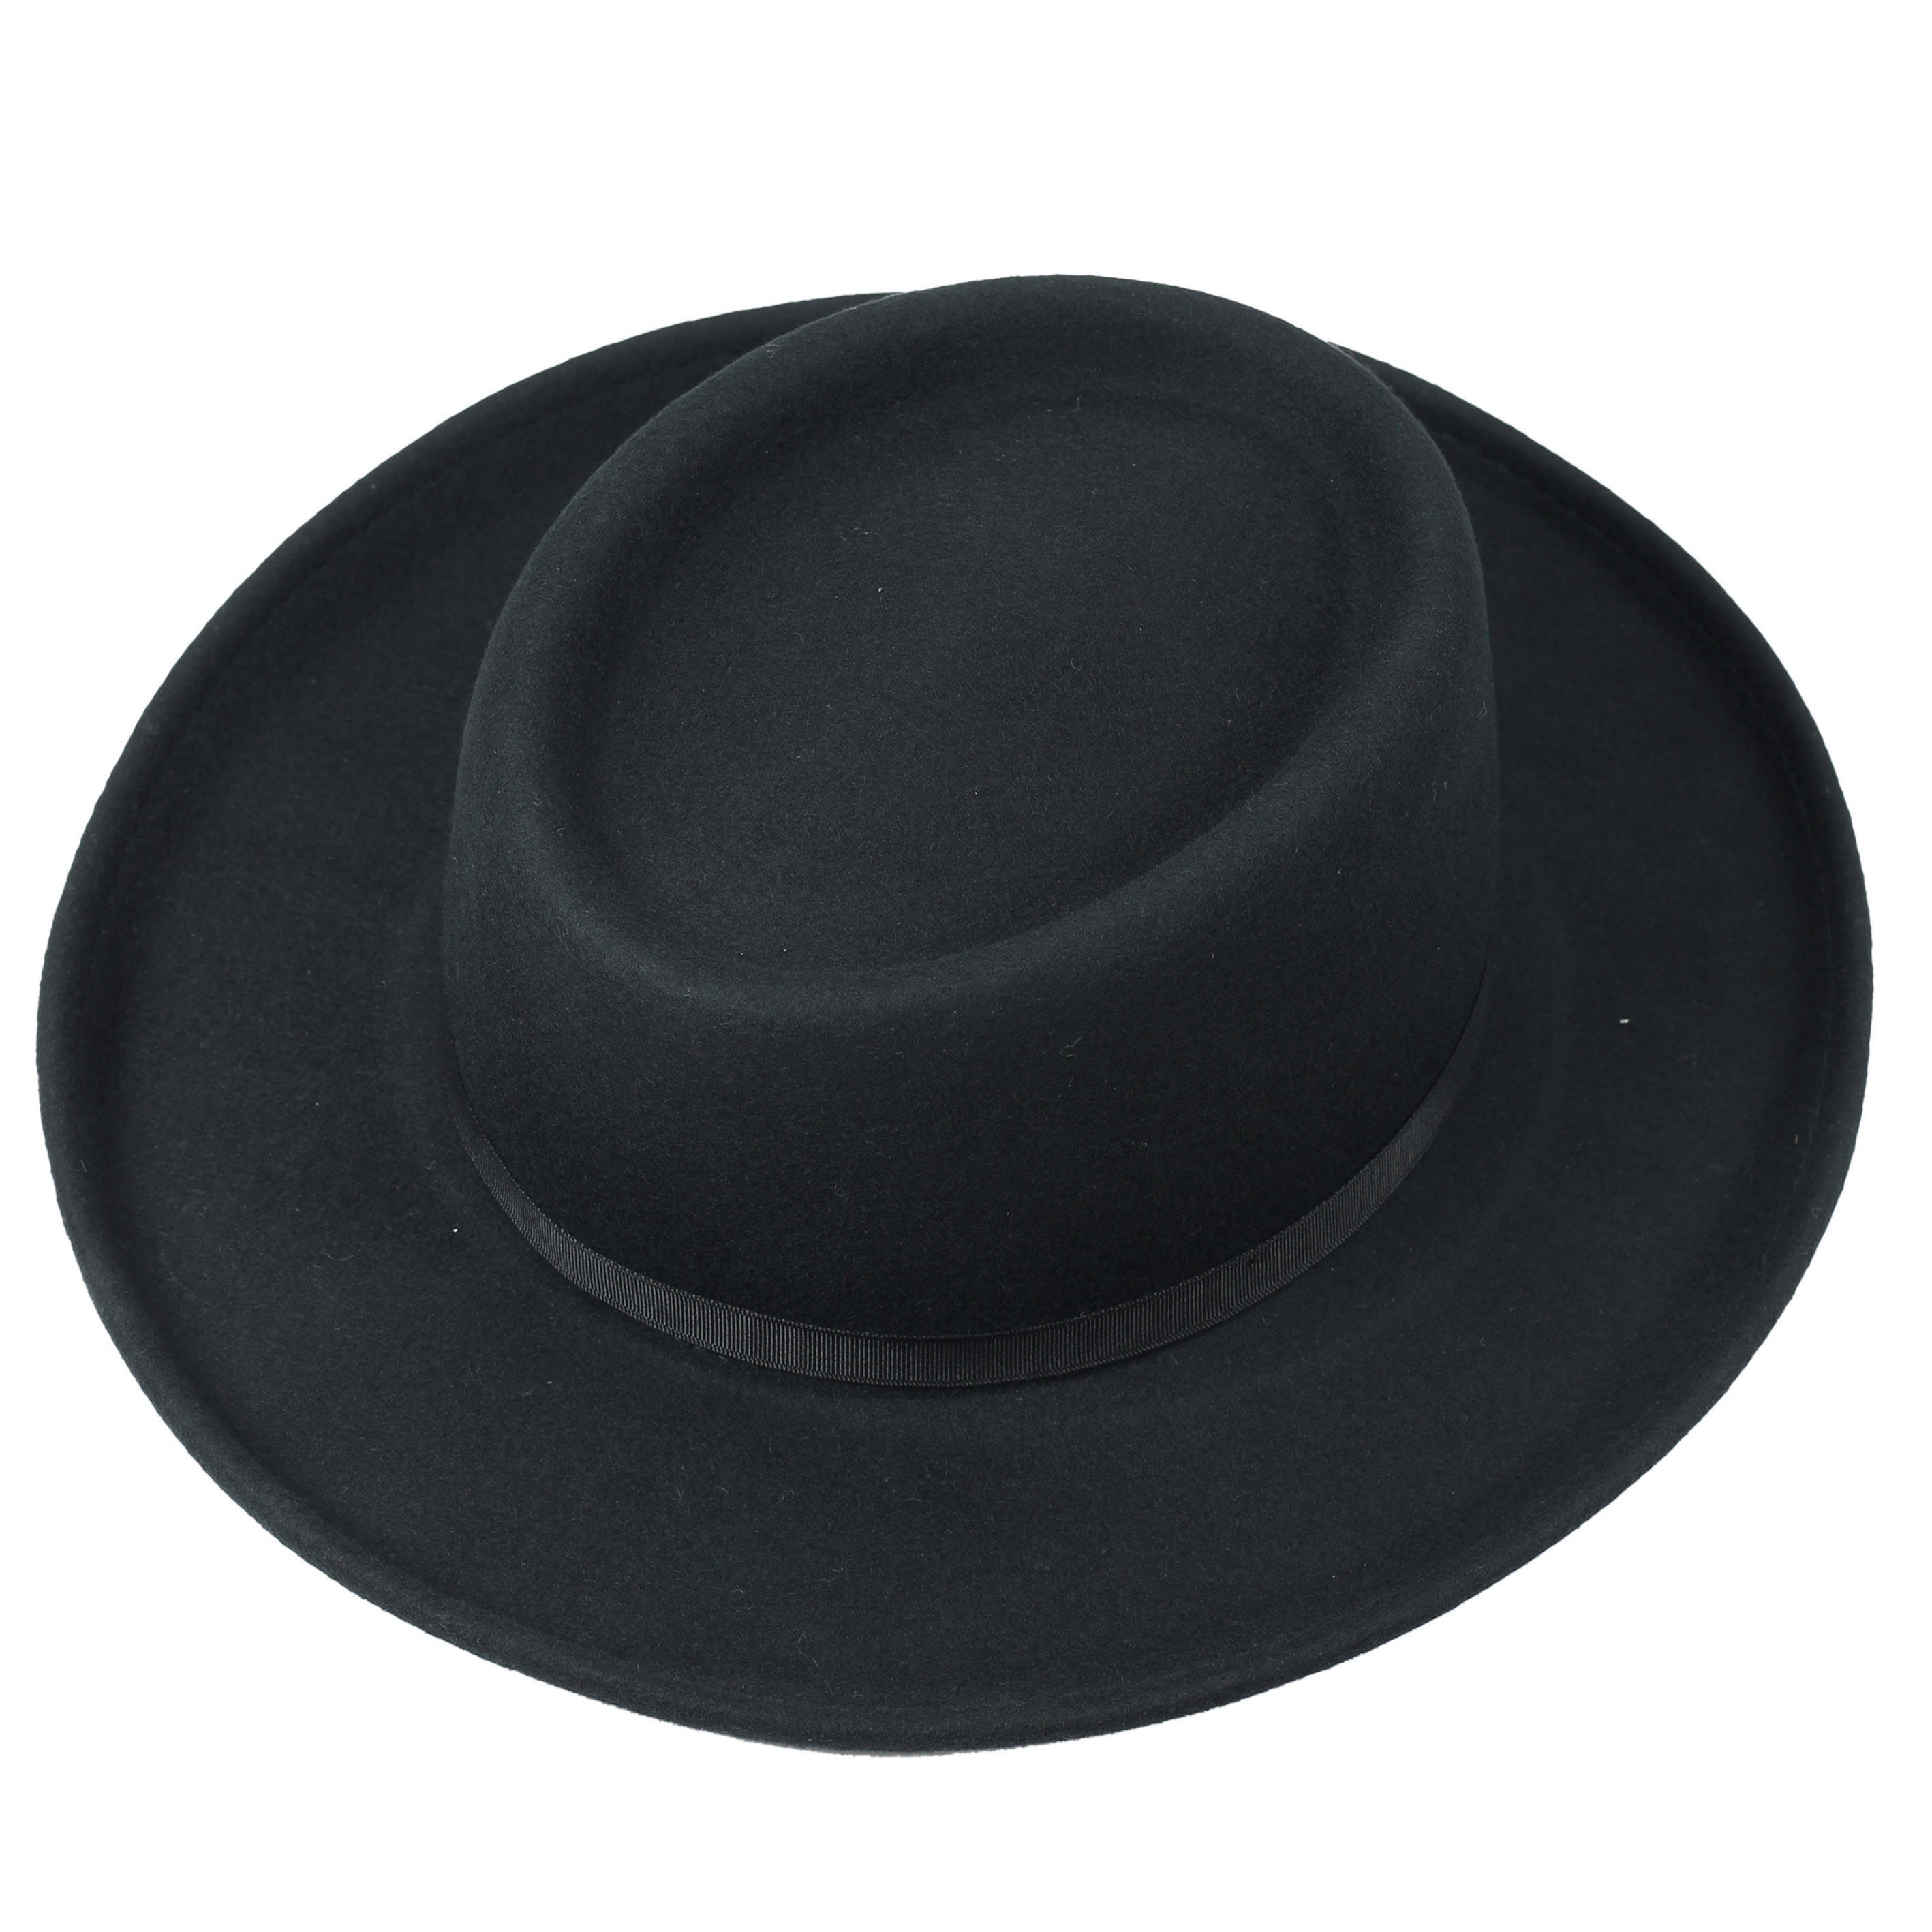 Crushable Wide Brim Curved Hat